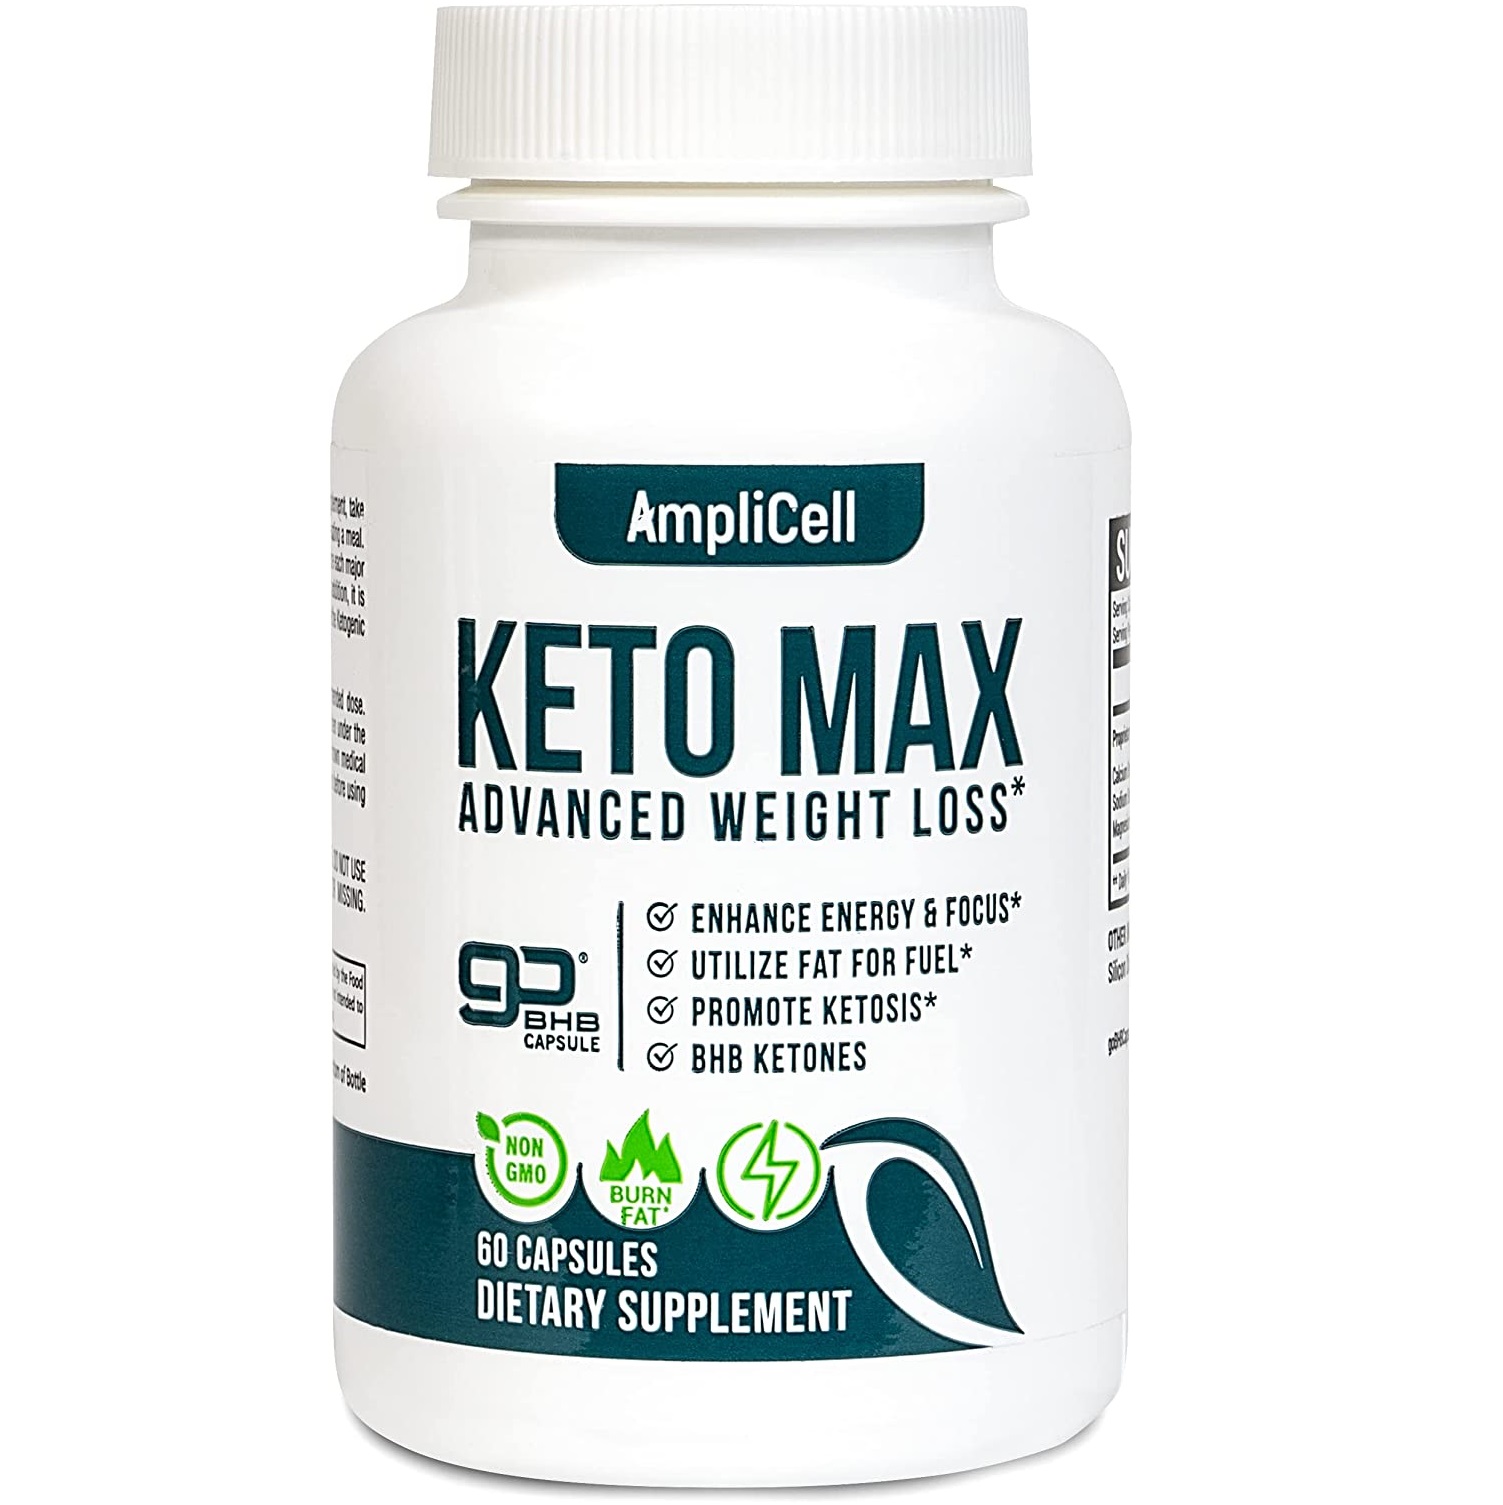 AMPLICELL Keto Max Advanced Weight Loss Diet Pill